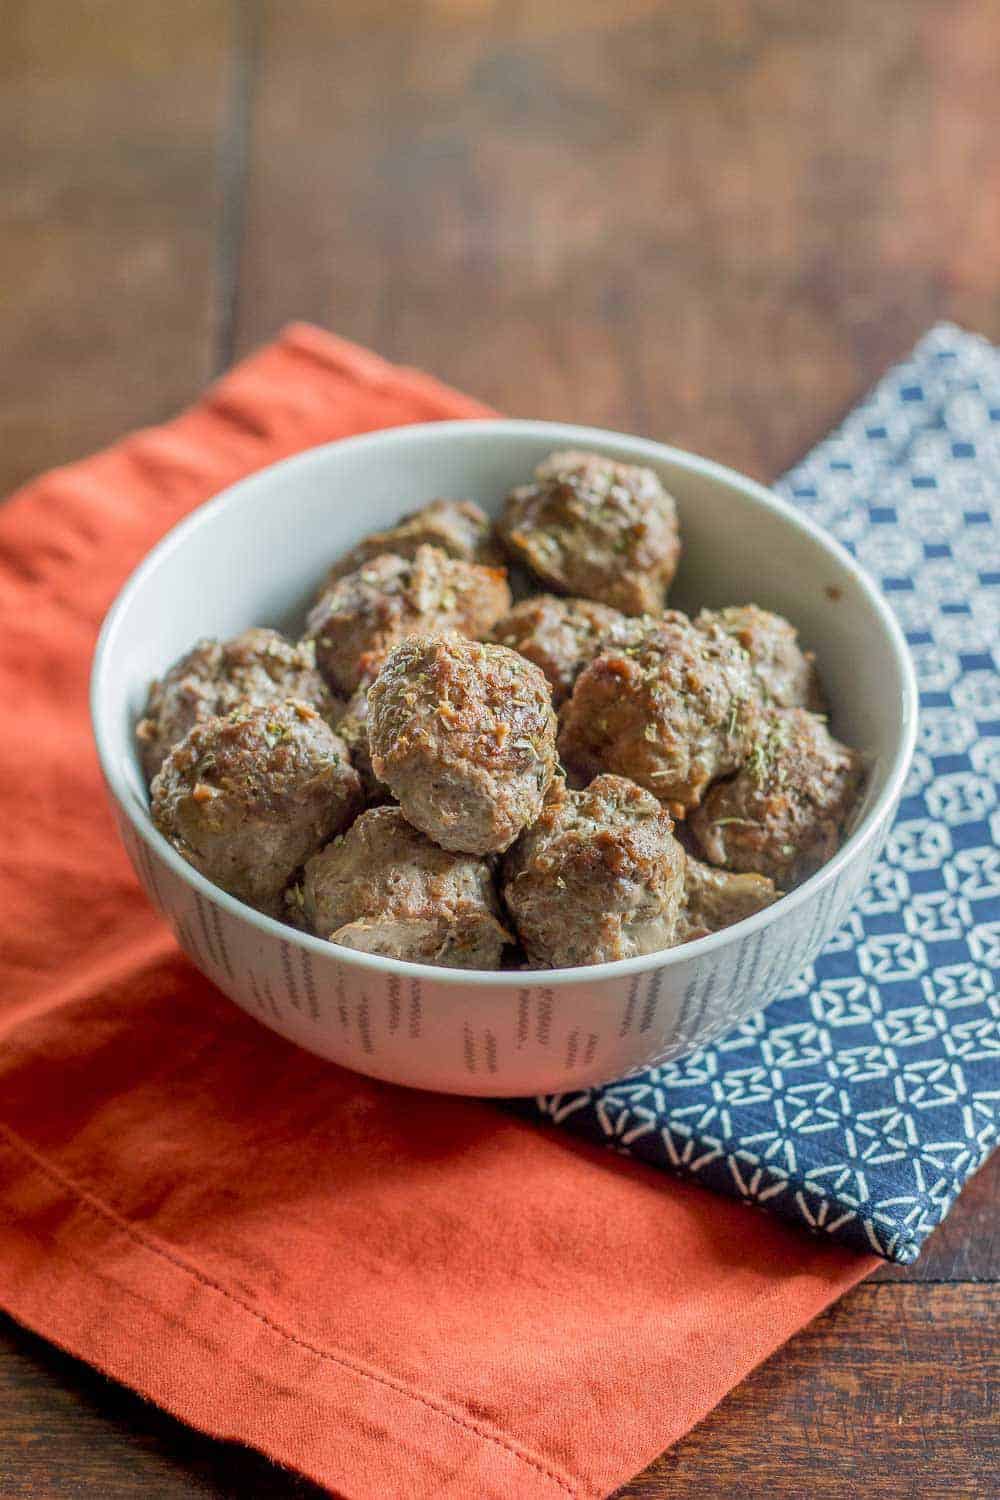 Baked bison meatballs are quick and easy to make any night of the week. Use them for pasta, sandwiches, and more.